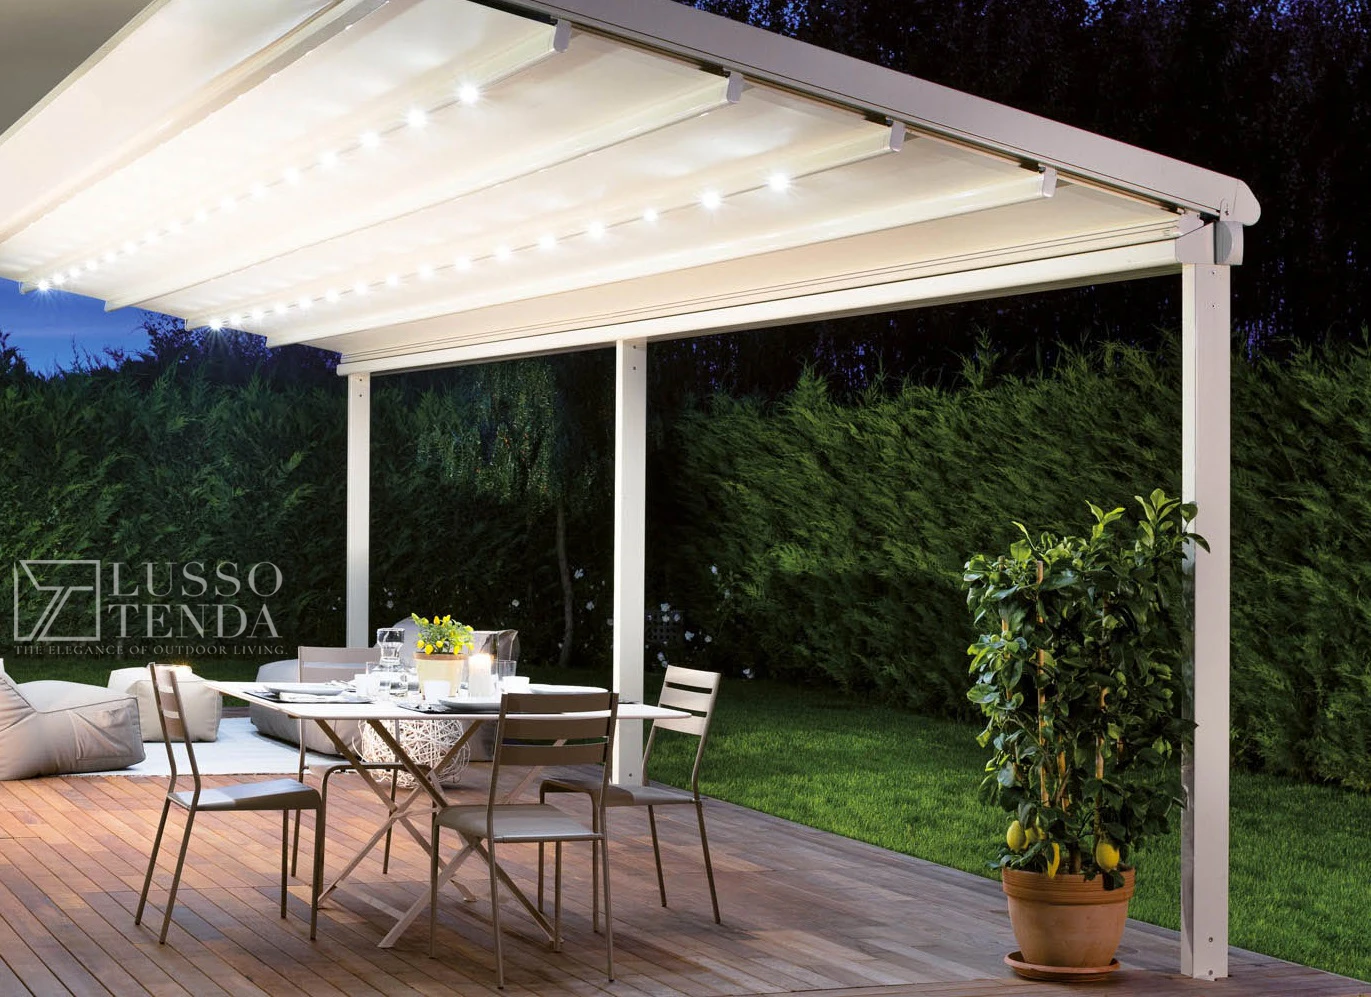 Luxury Automatic Motorized Pergola Systems For All Places - Special Concepts Bring Exclusivity